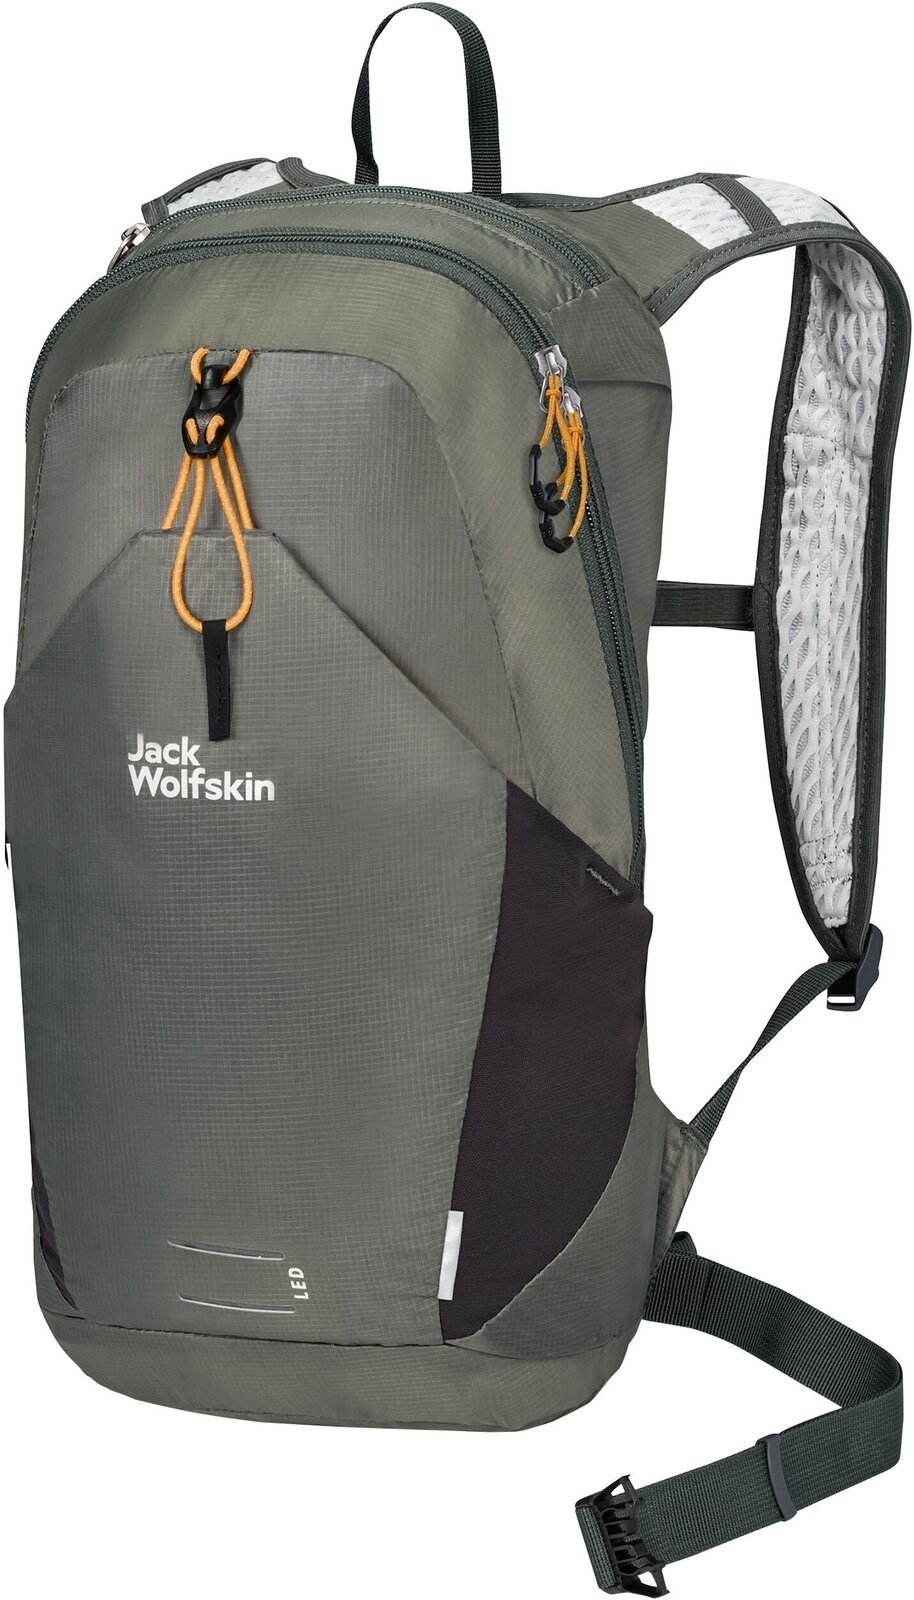 Cycling backpack and accessories Jack Wolfskin Moab Jam 10 Gecko Green Backpack